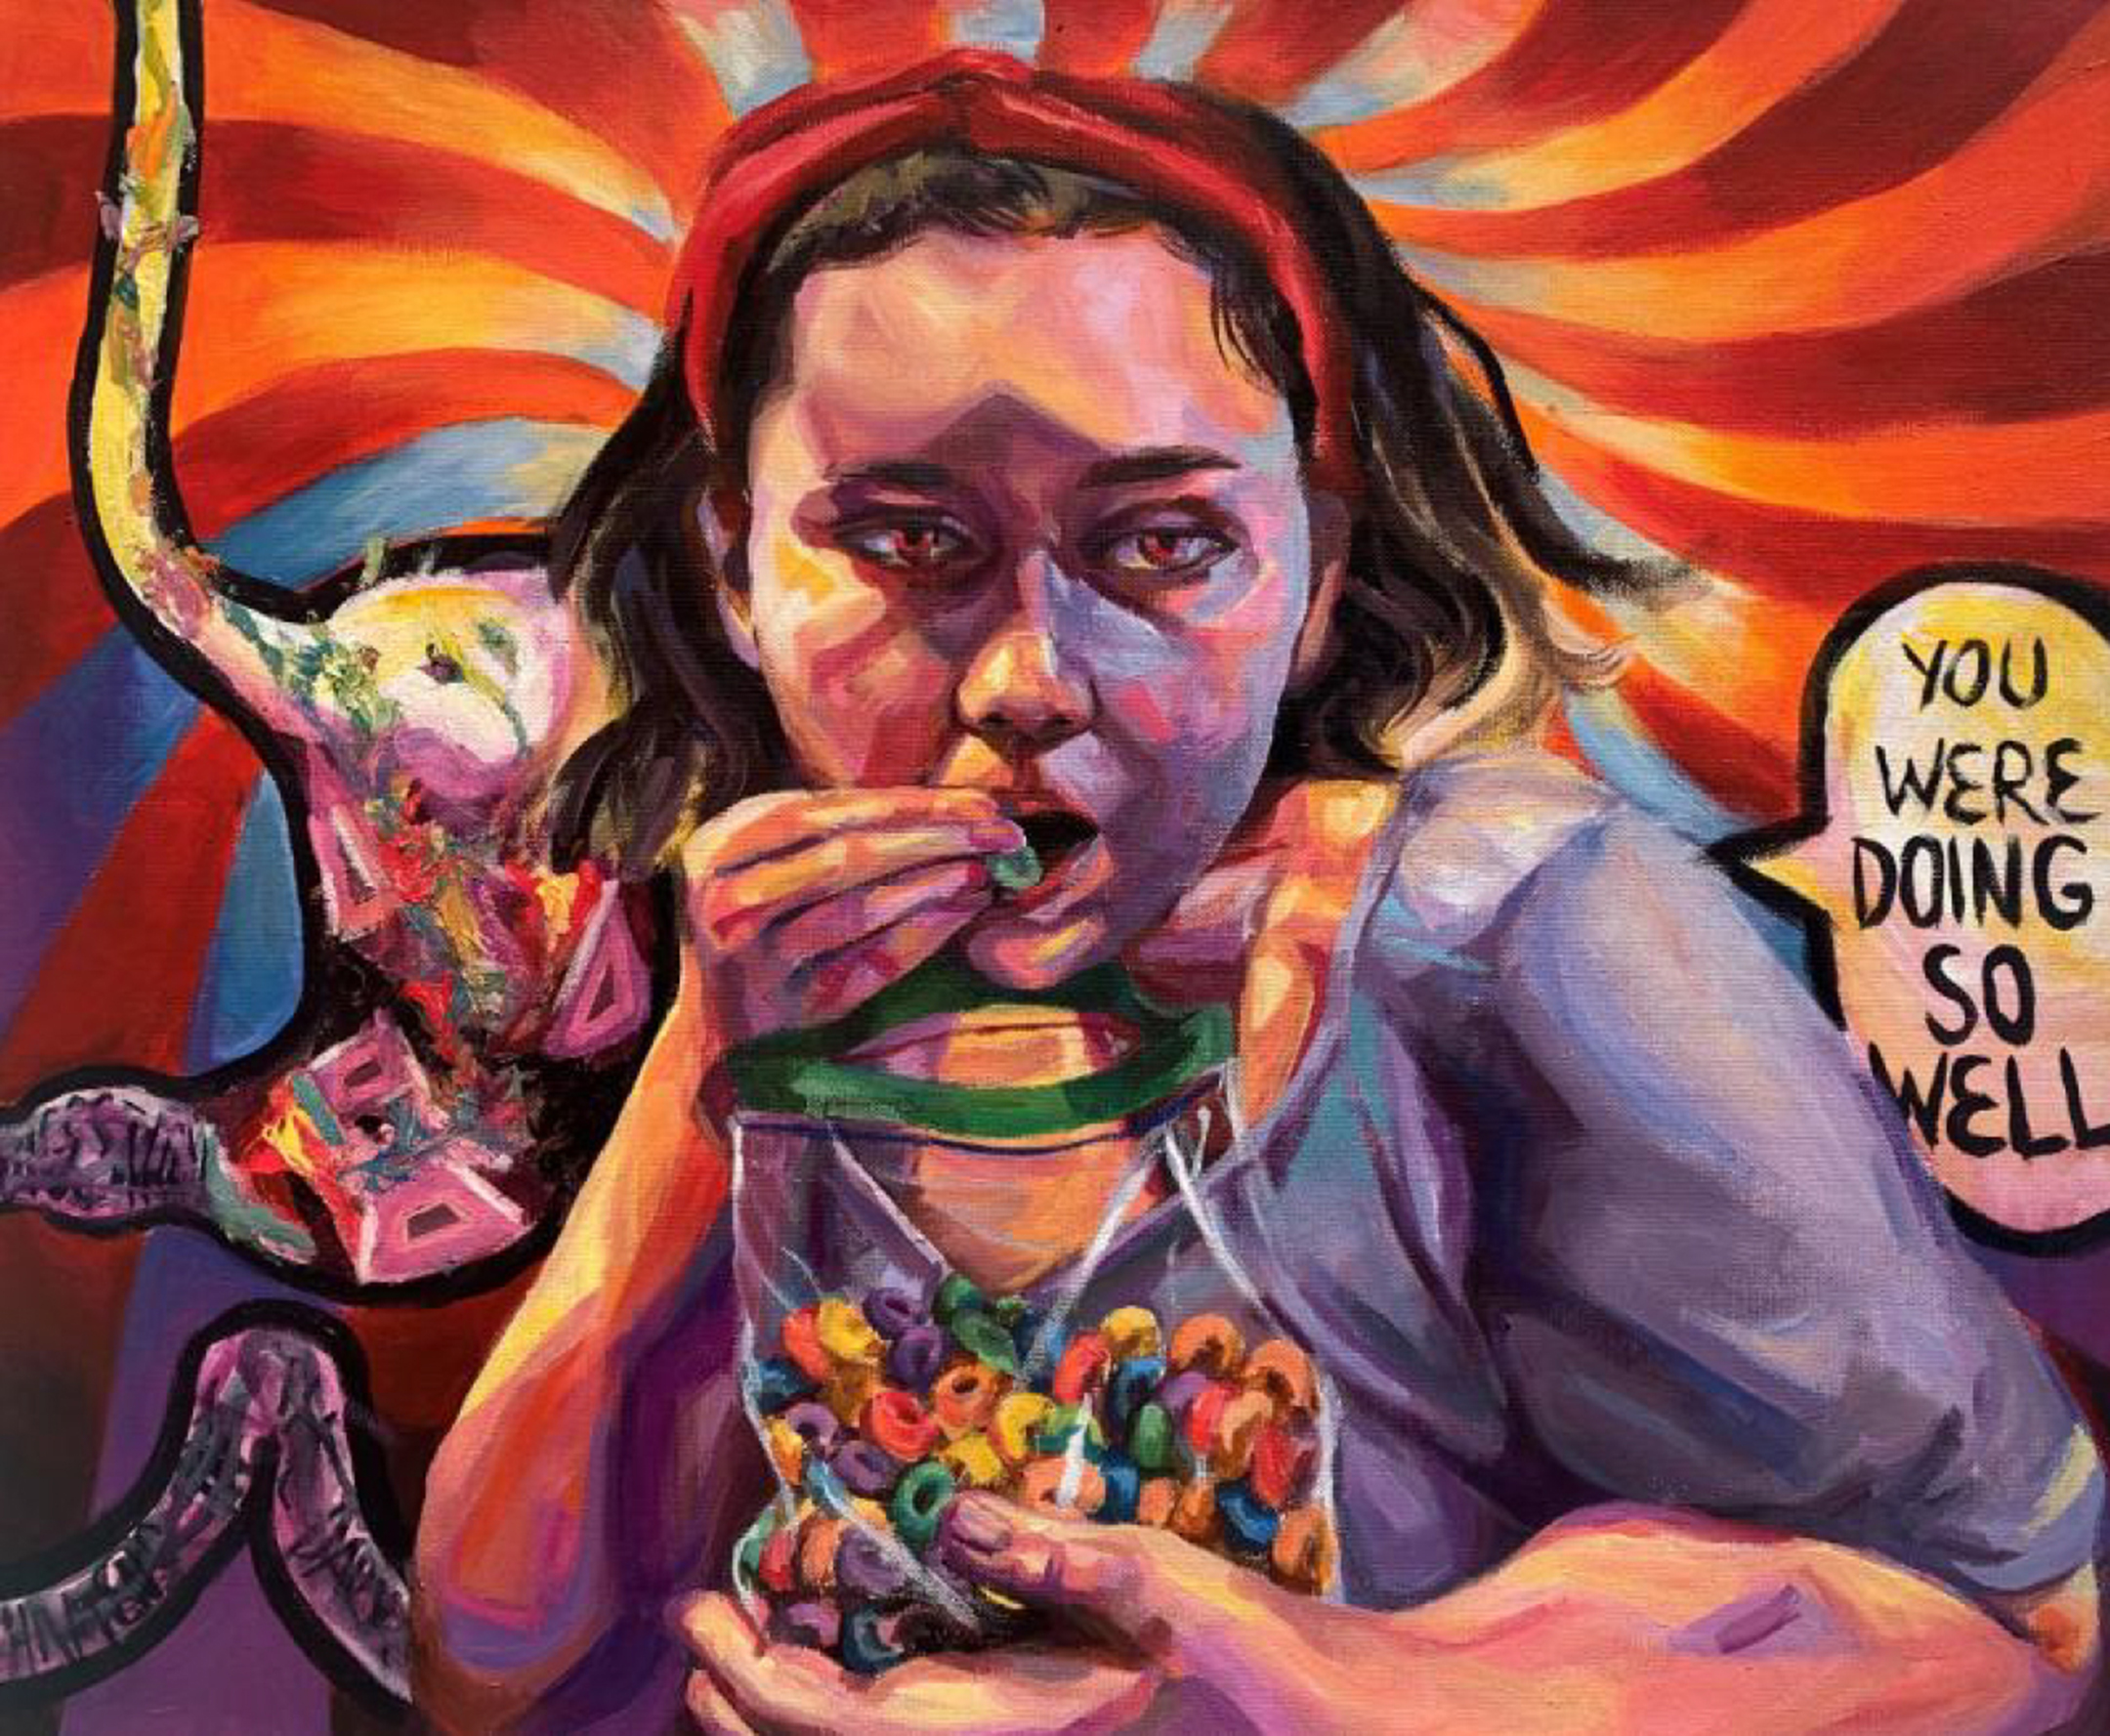 exaggerated painting of a young woman, wearing purple and clutching a bag of Fruit Loops, eating the cearl with a red-orange swirl in the background and a word bubble that says "you were doing so well"